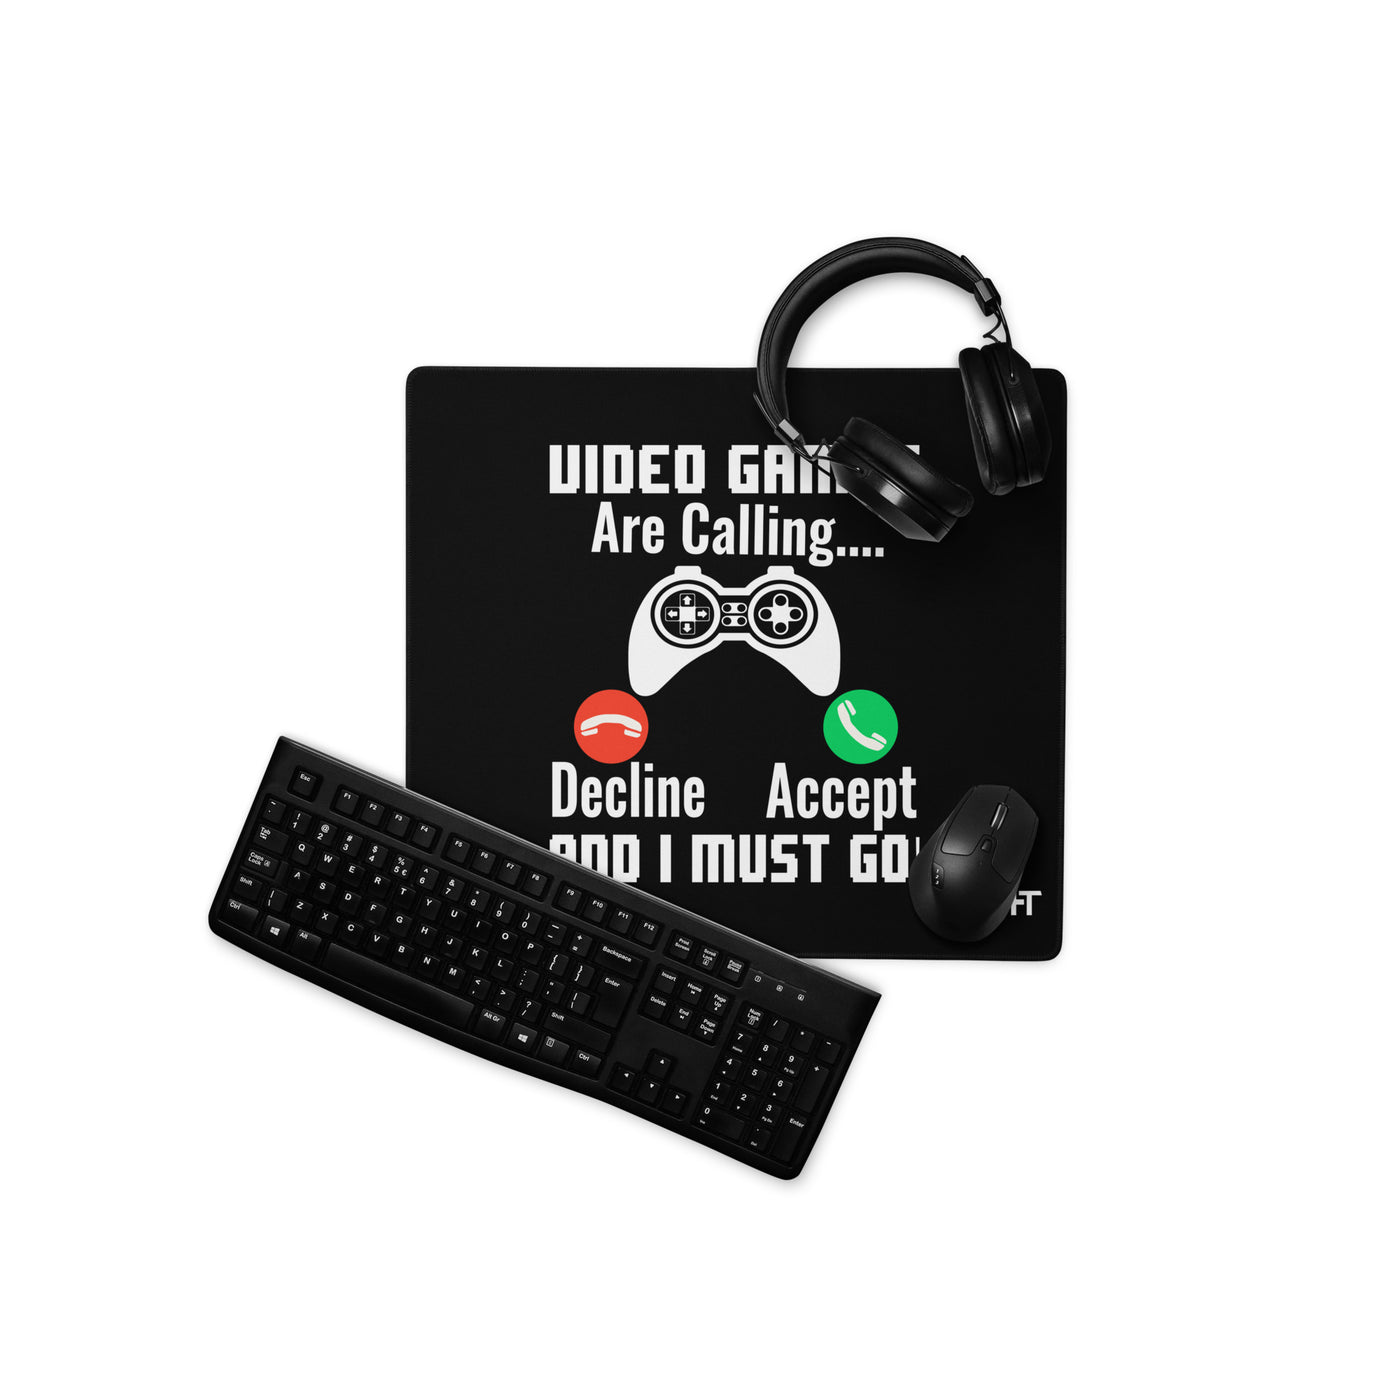 Video Games are Calling and I must Go Rima 18 - Desk Mat